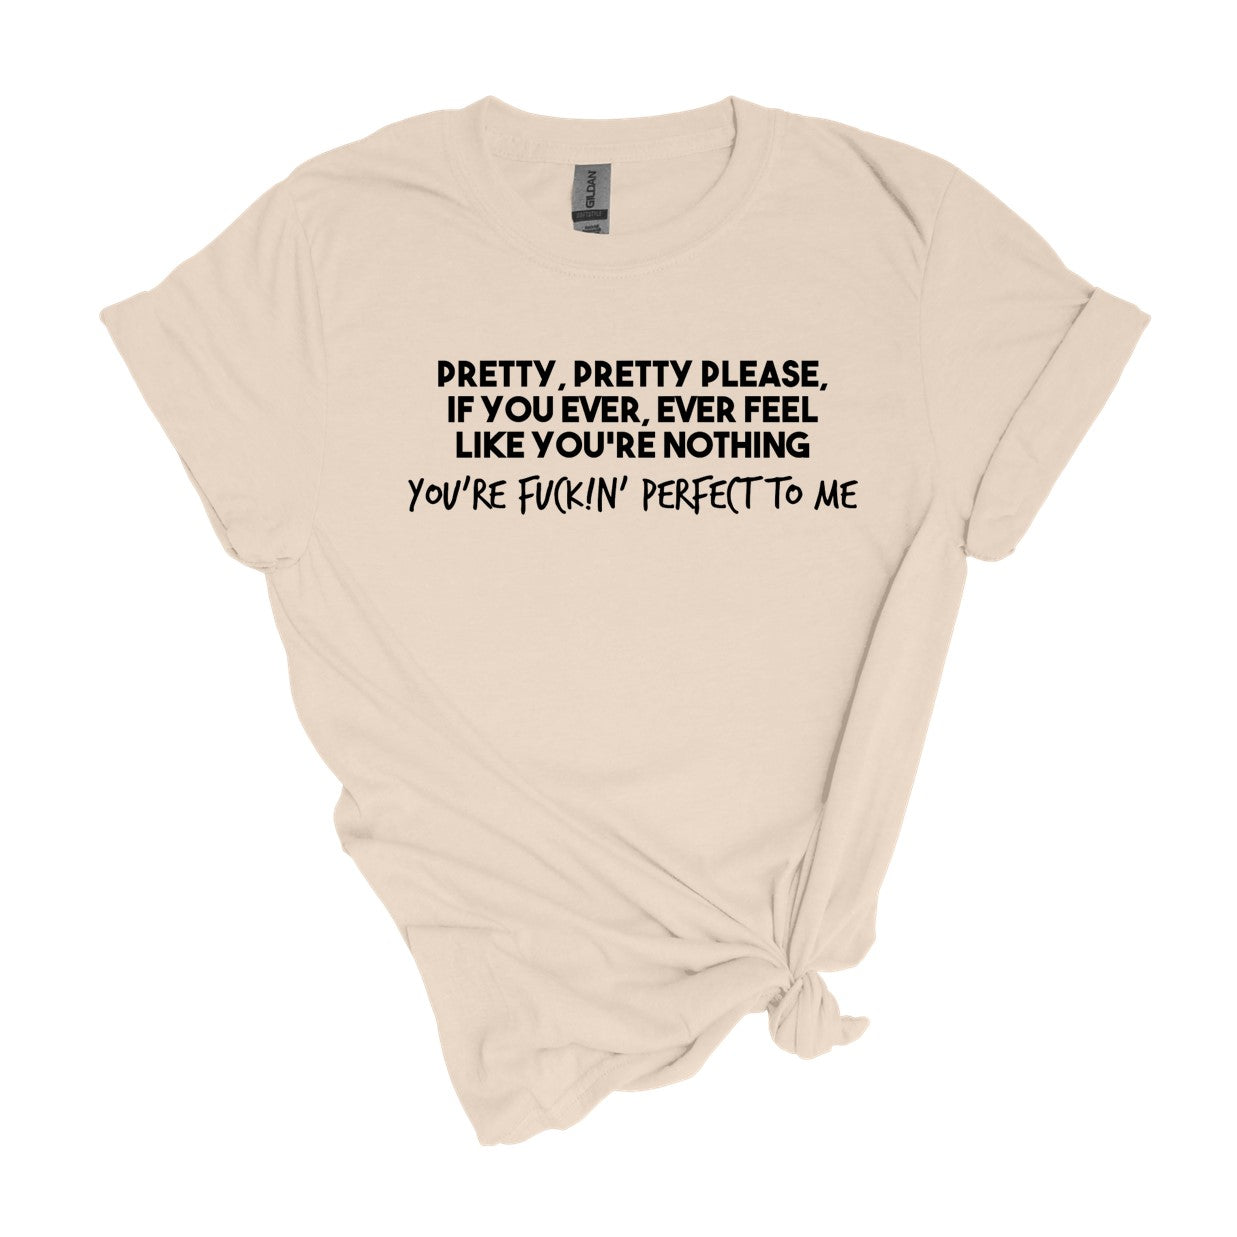 You're Fuckin' Perfect to Me - Adult Unisex Soft T-Shirt